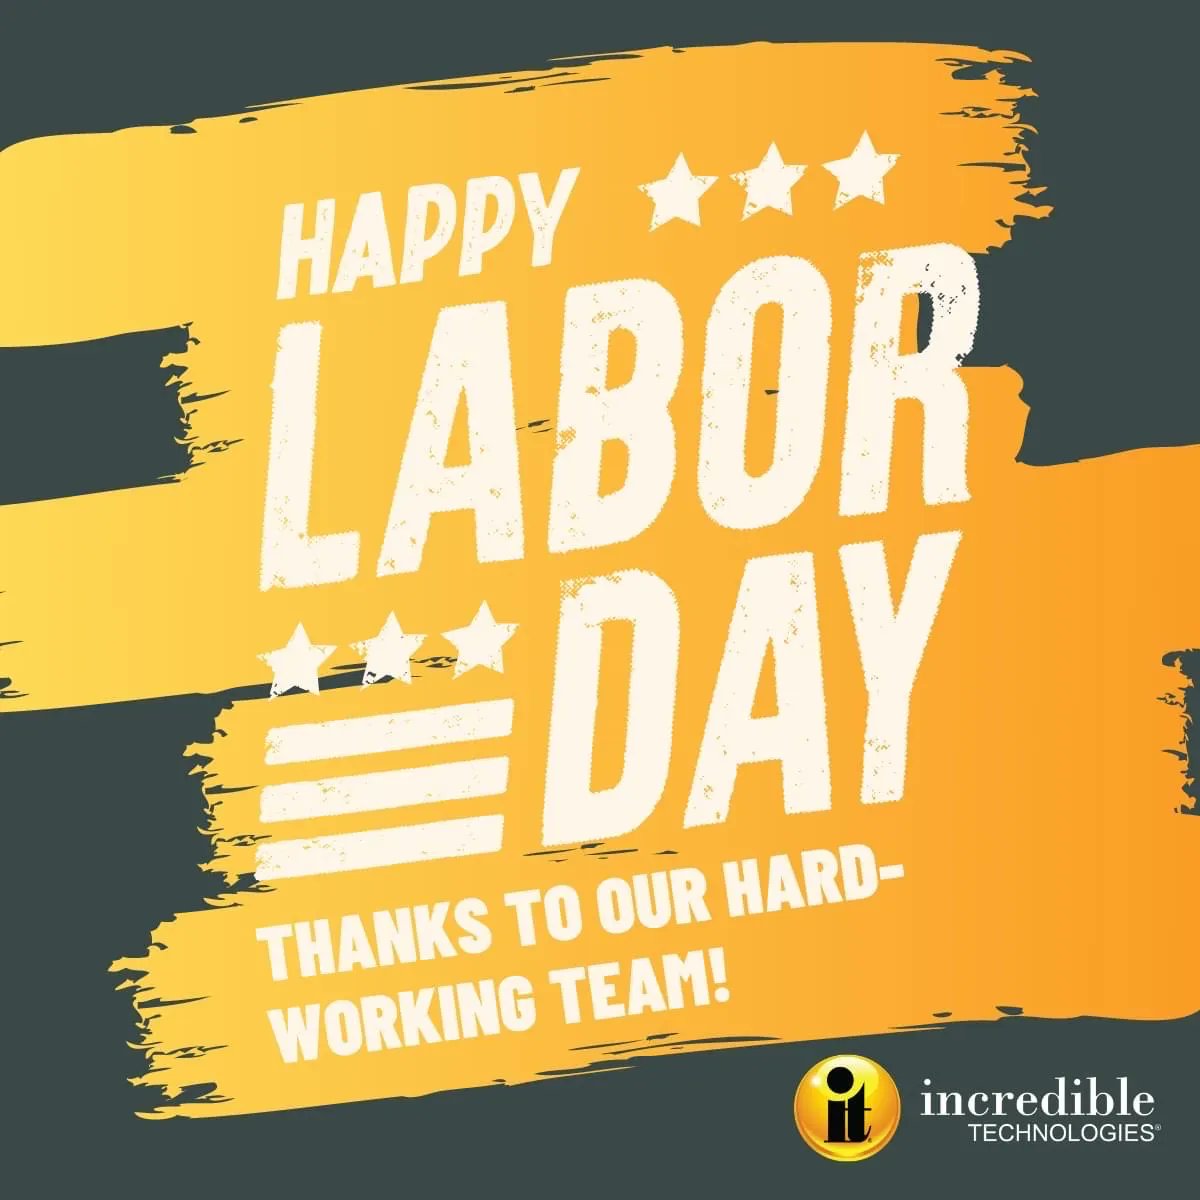 Happy Labor Day! Our team is offline to enjoy the holiday with their families and friends. We’ll be back tomorrow!